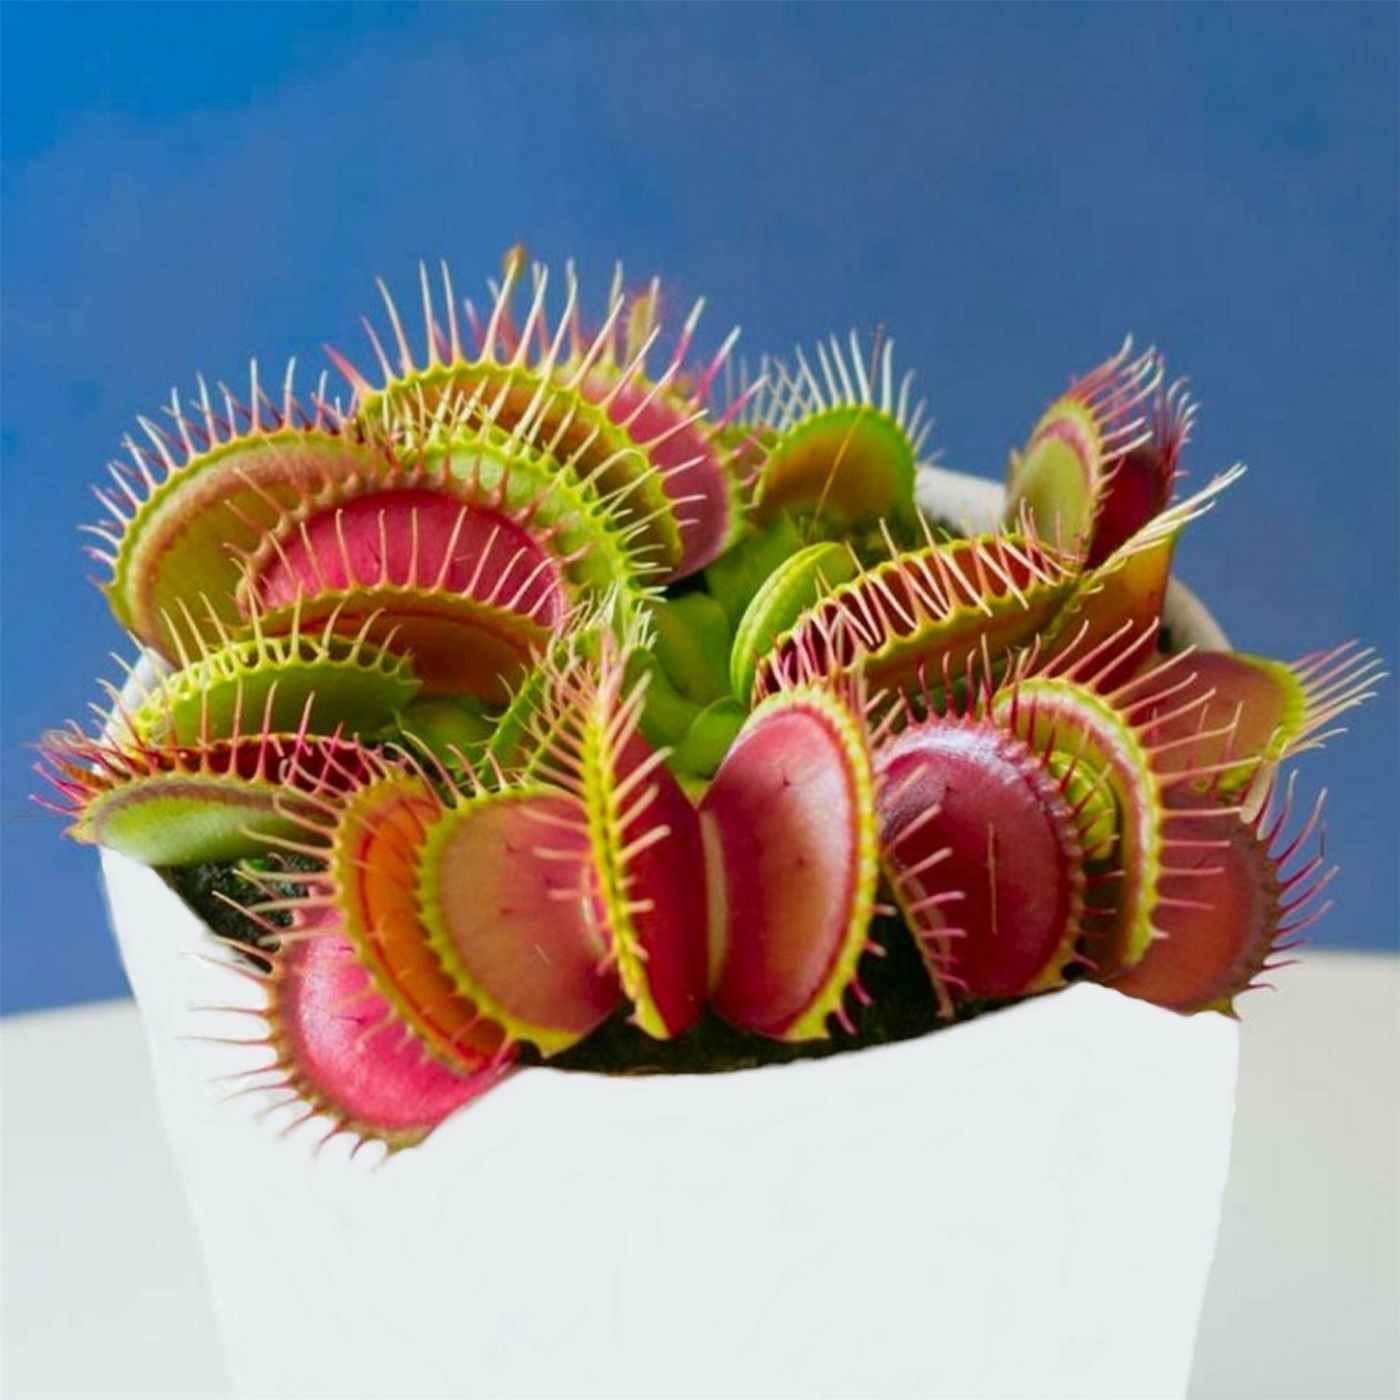 The Venus fly trap (Dionaea muscipula) is not effective against stubble fly and other